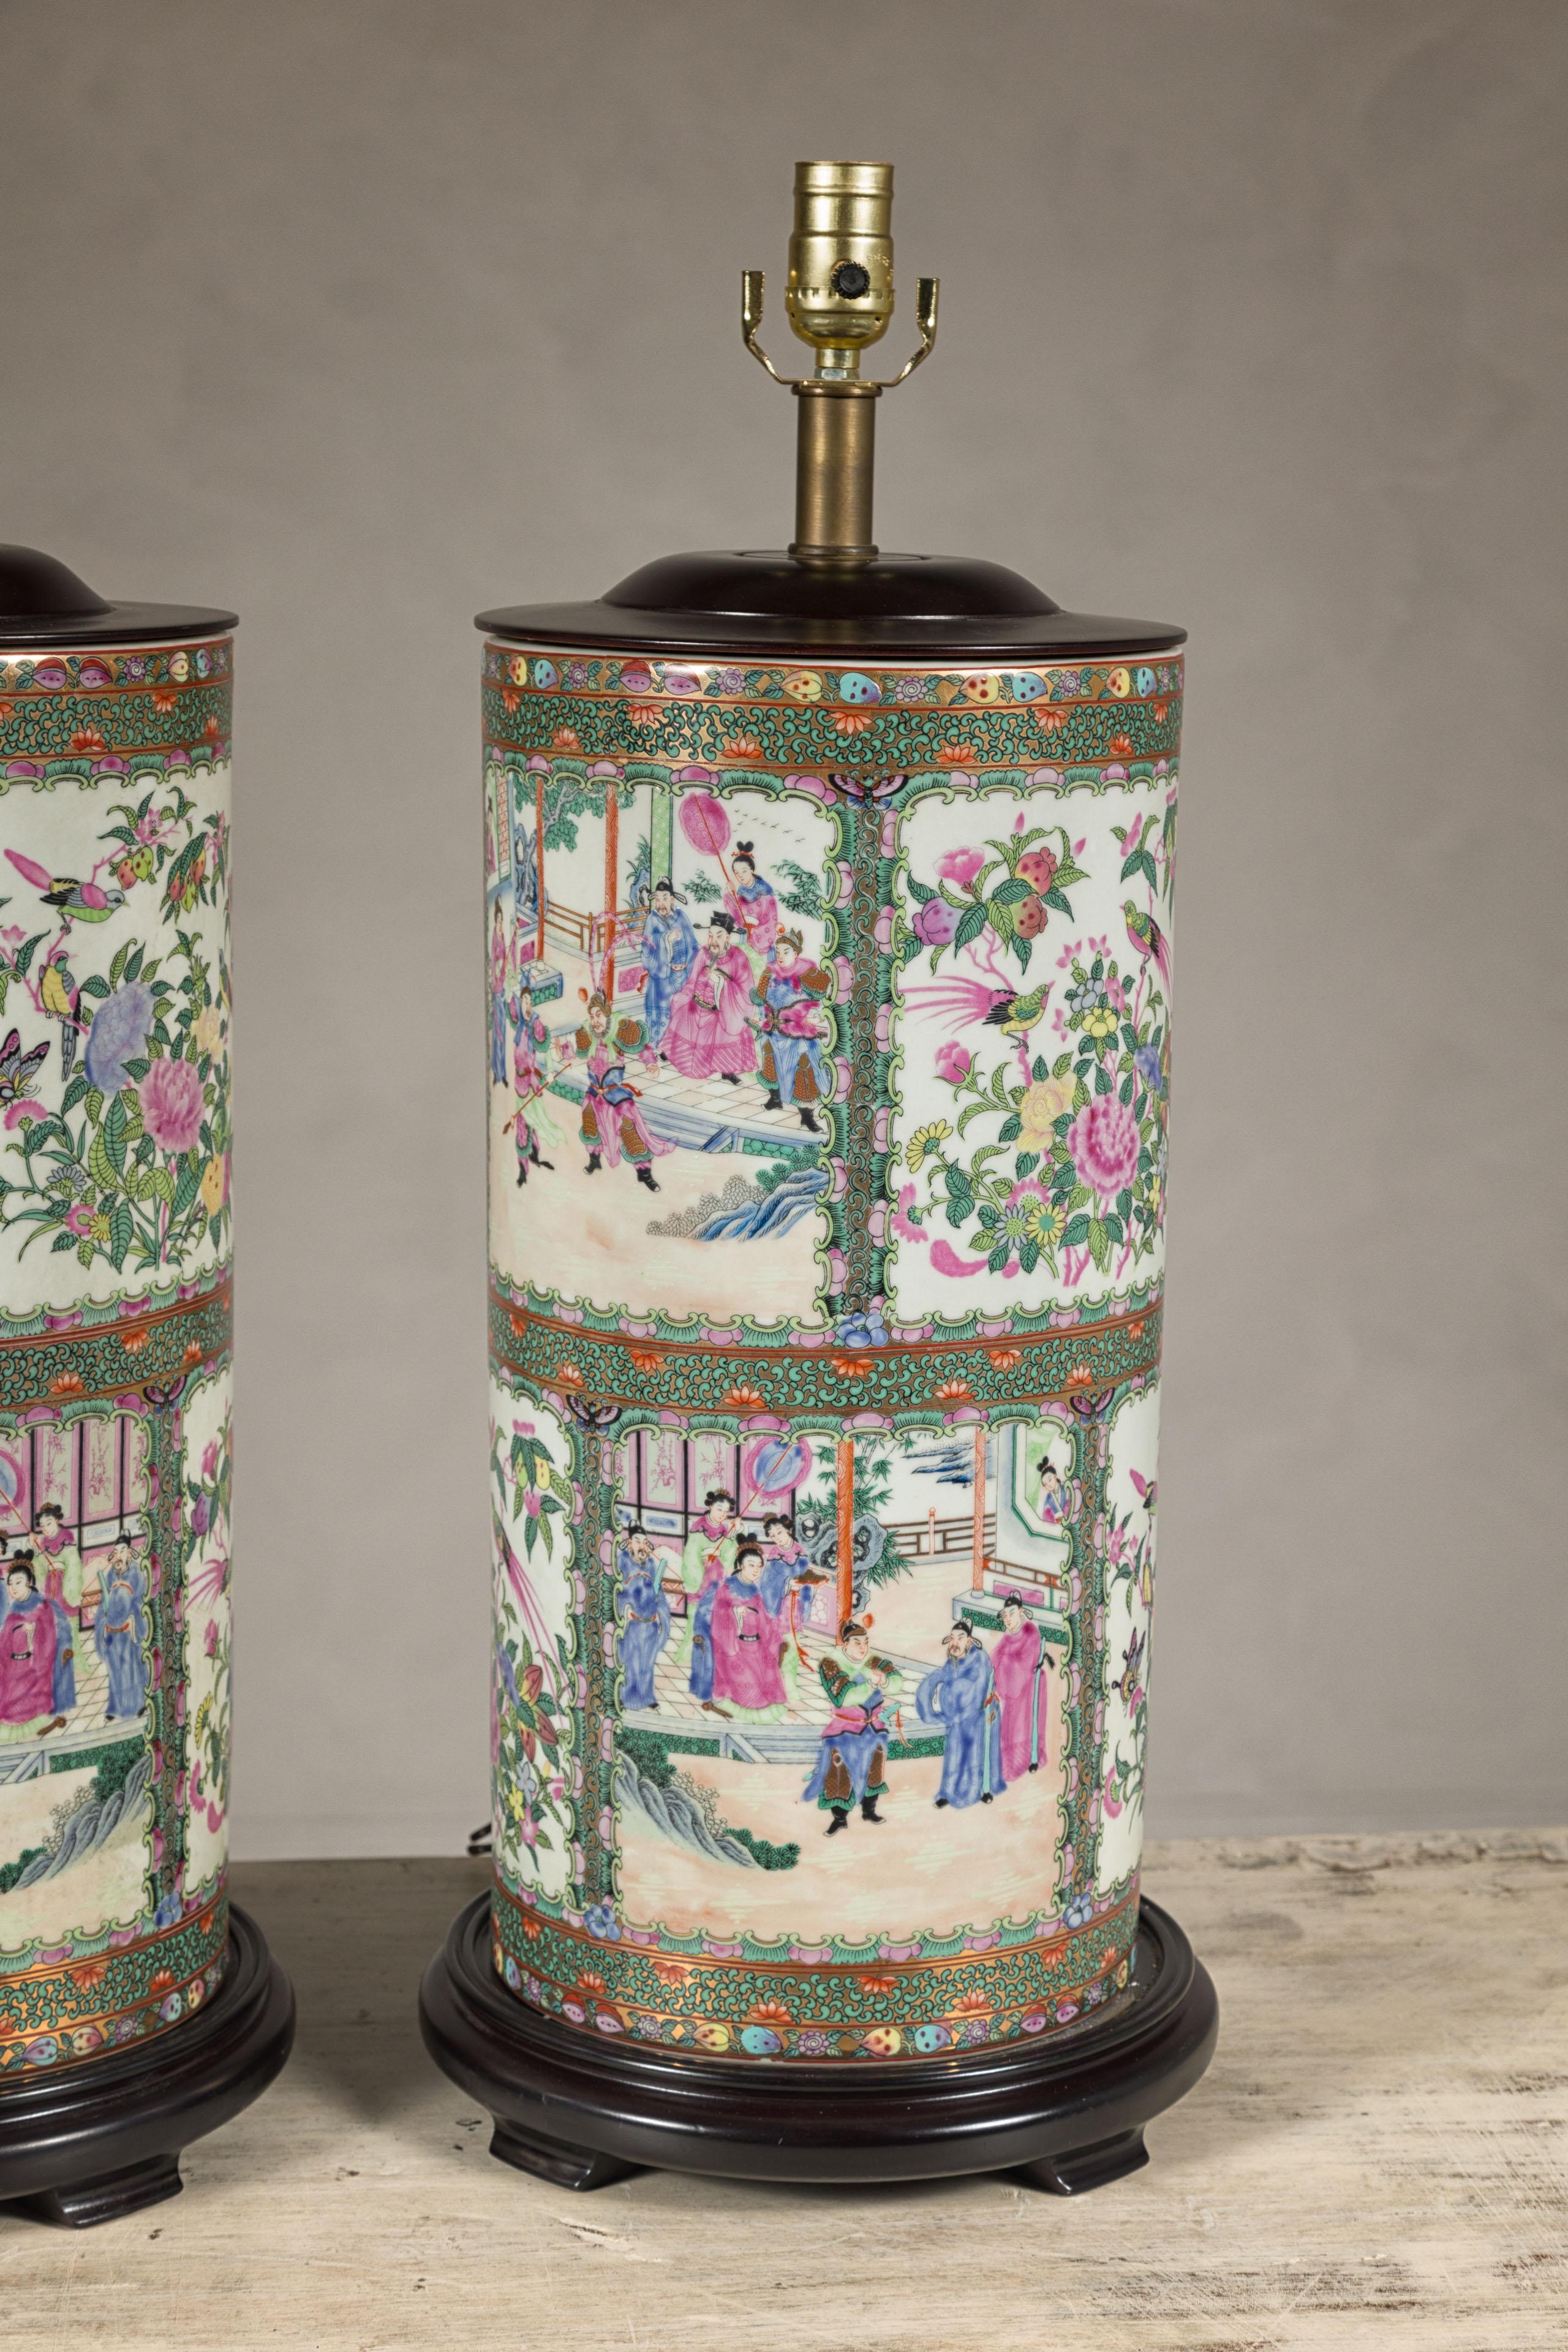 Pair of Hand-Painted Rose Medallion Table Lamps with Court Scenes and Birds In Good Condition For Sale In Yonkers, NY